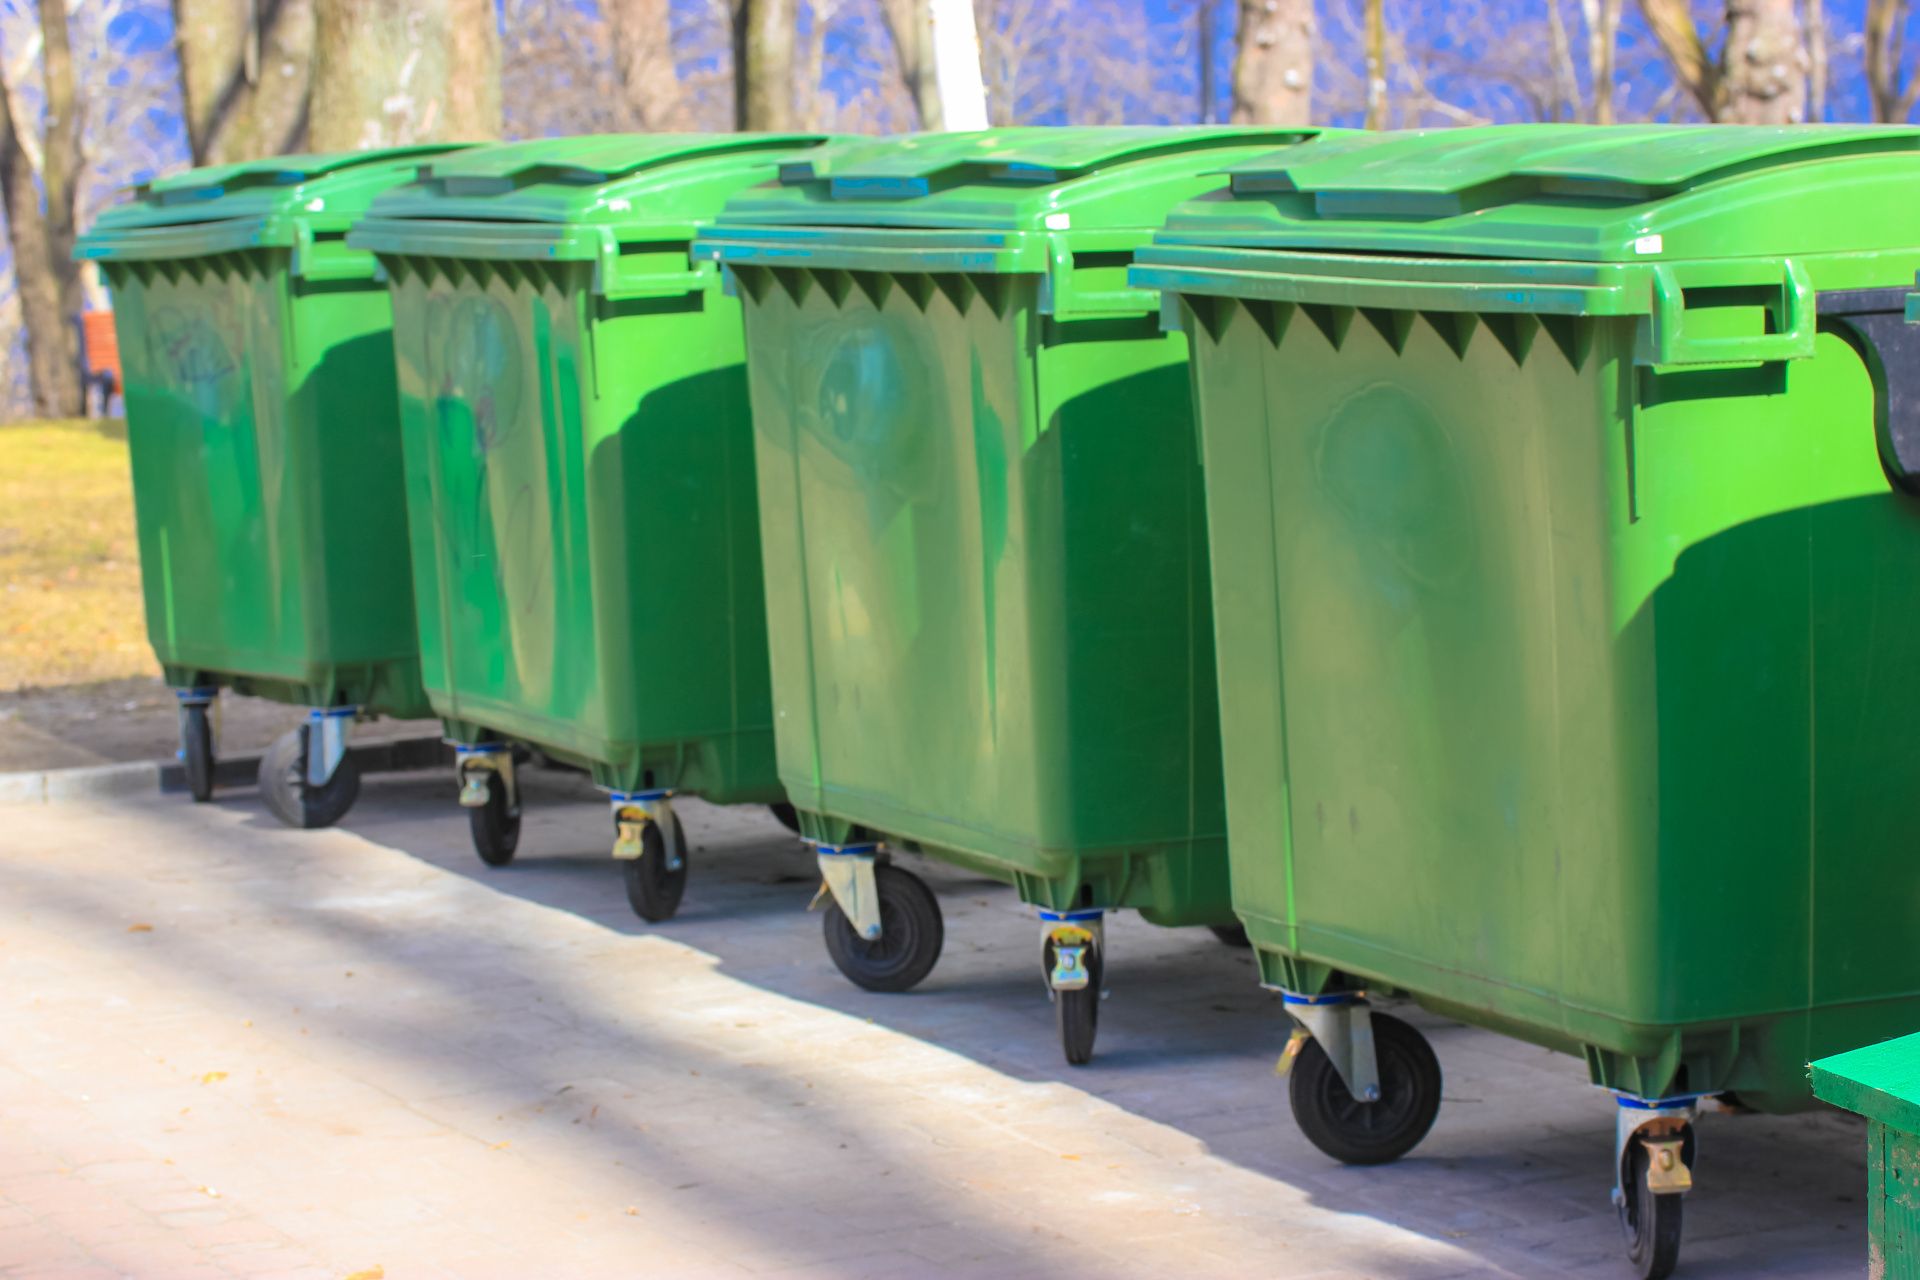 Commercial bins lined up